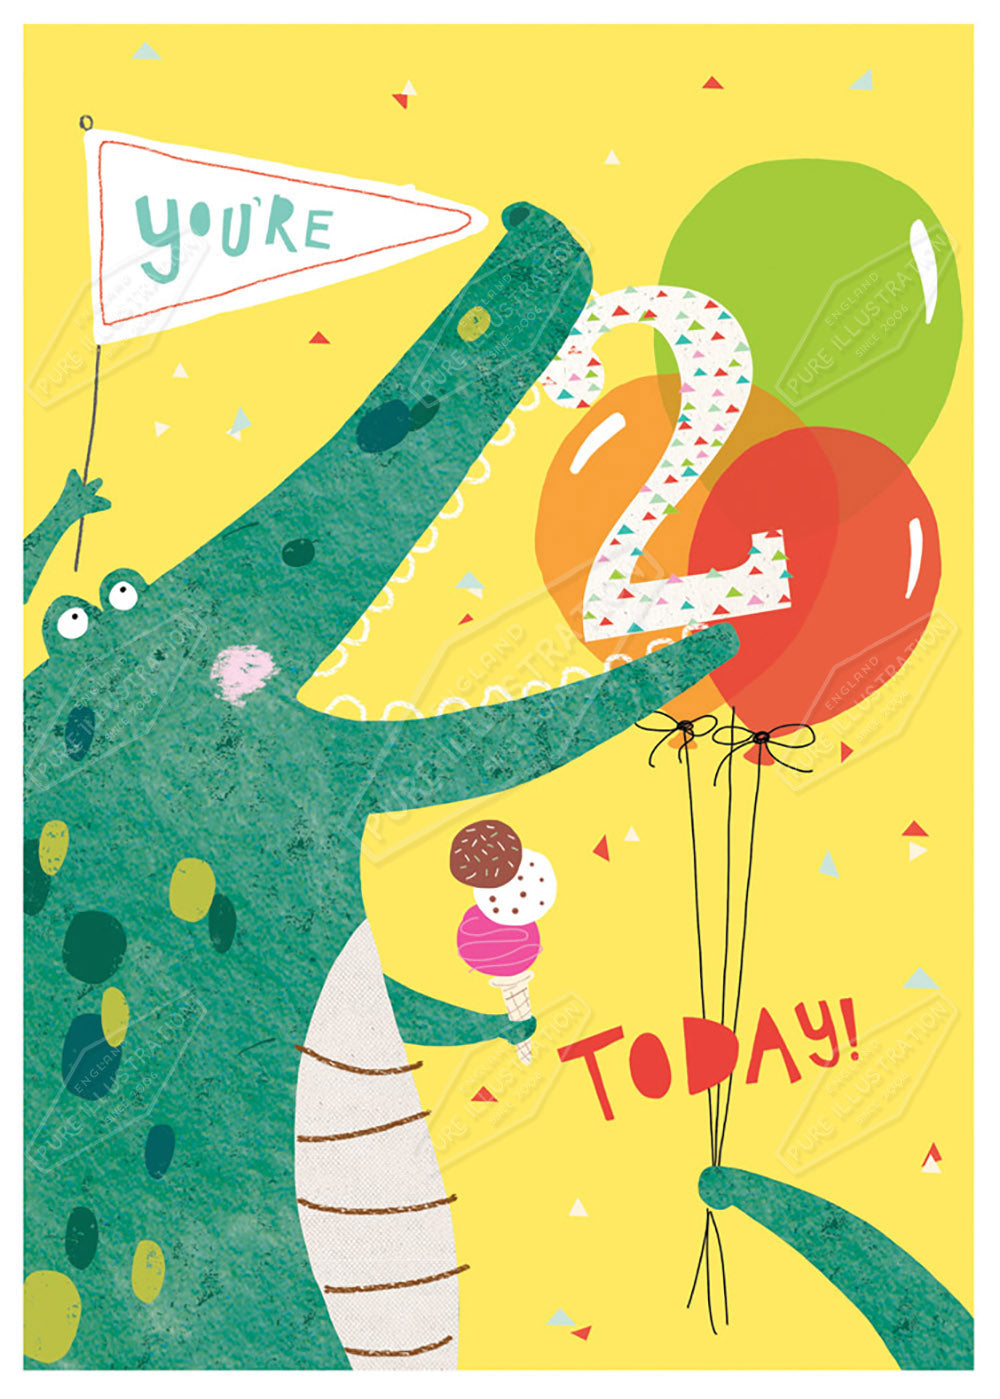 Crocodile Age Greeting Card by Cory Reid for Pure Art Licensing Agency & Surface Design Studio